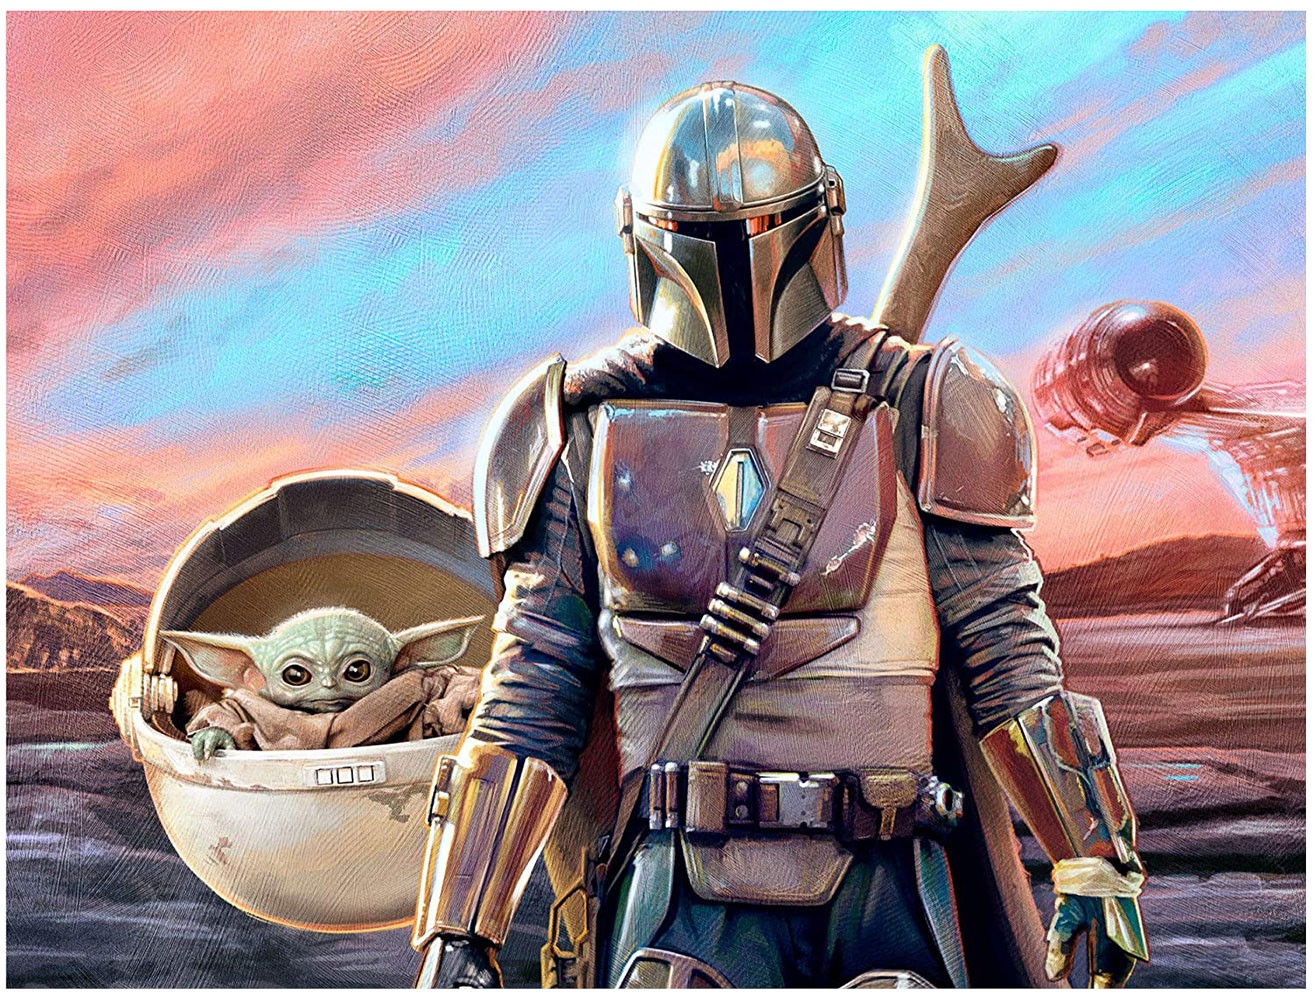 Mandalorian and The Child Mural